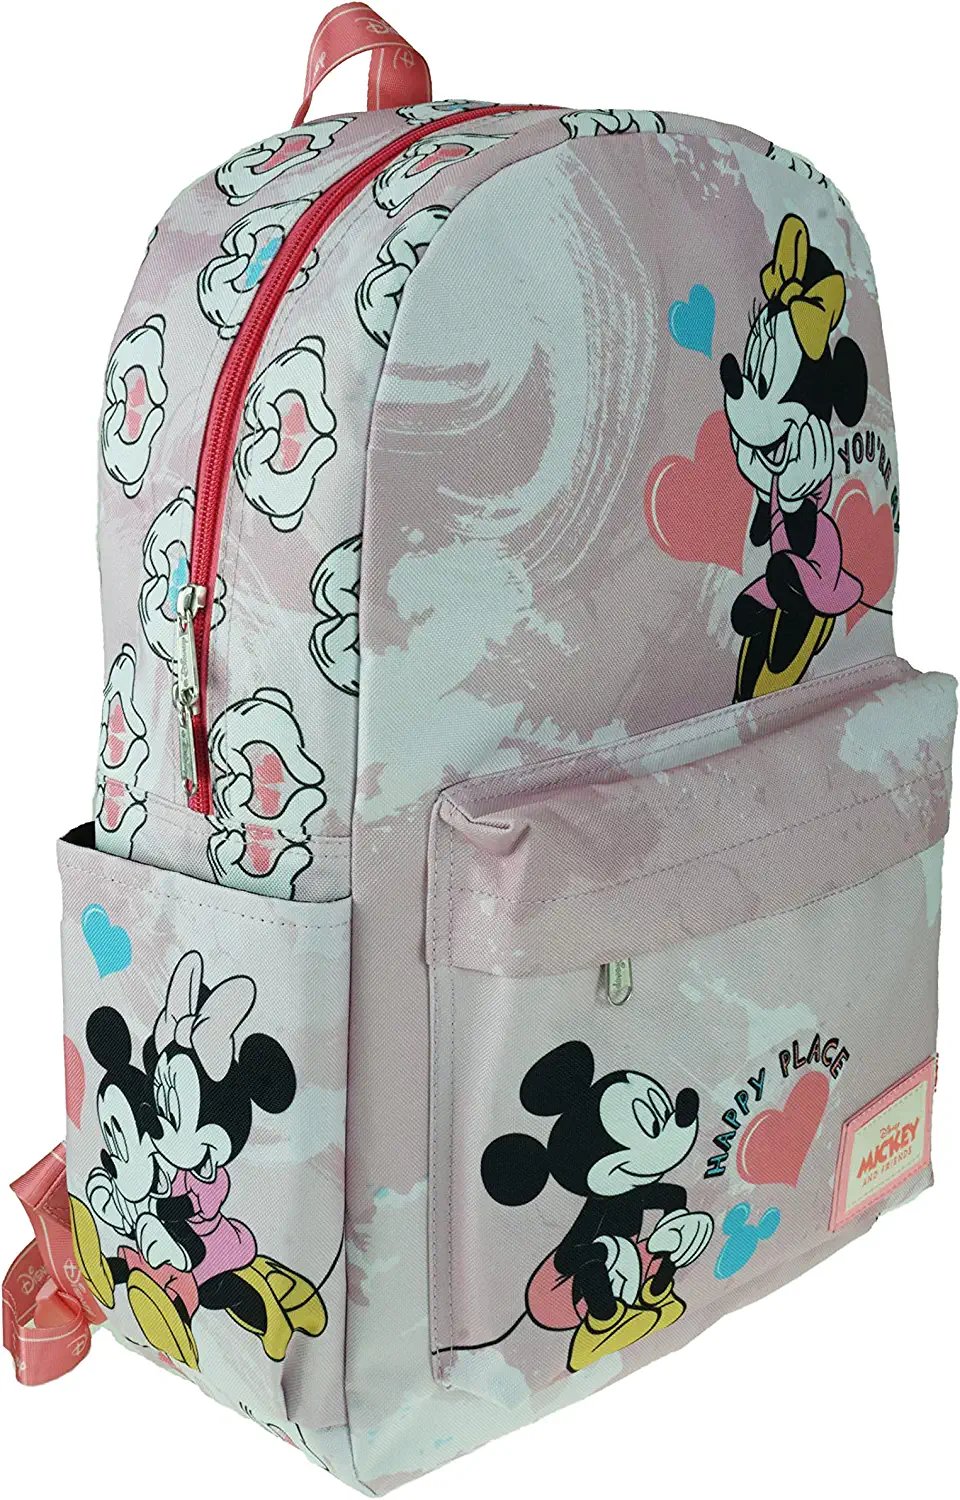 Disney Minnie Mouse Backpack 17" with Laptop Compartment for School, Travel, and Work - image 2 of 7